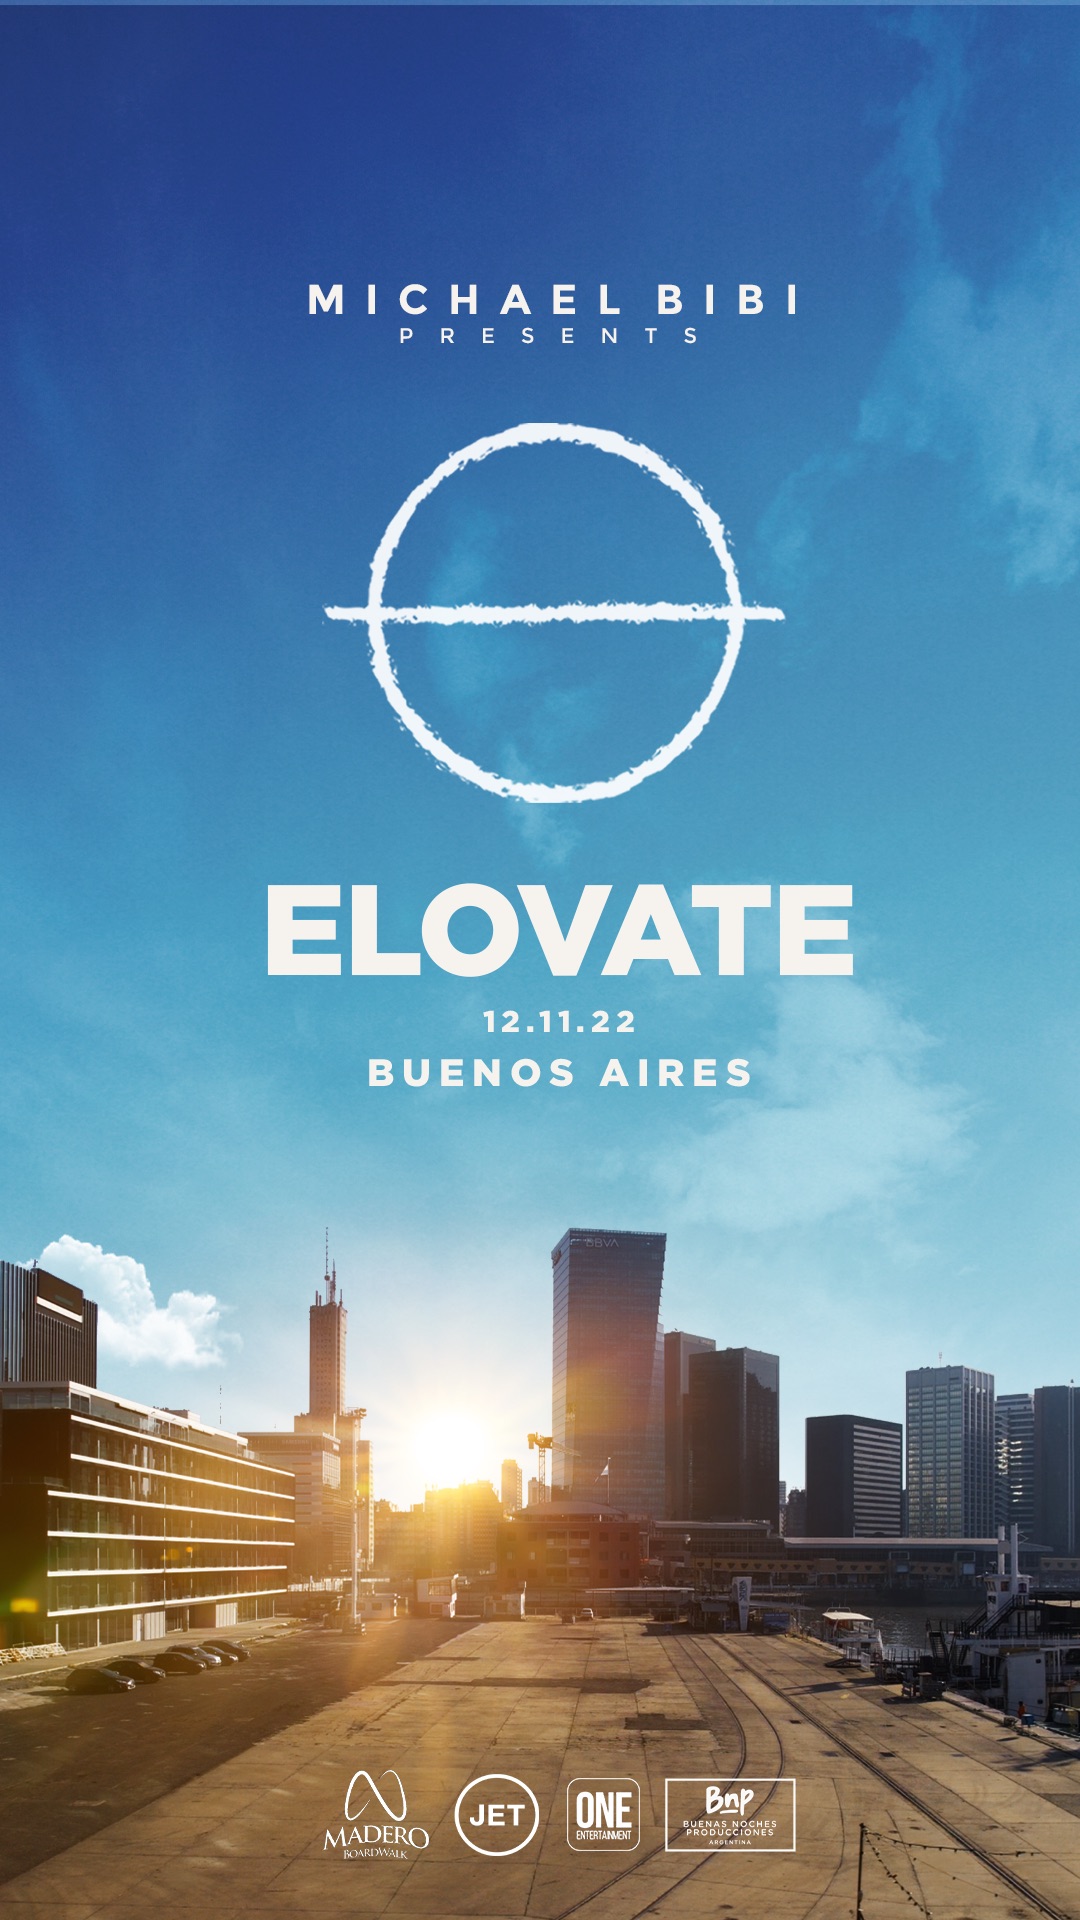 Michael Bibi presents ELOVATE at TBA, Buenos Aires